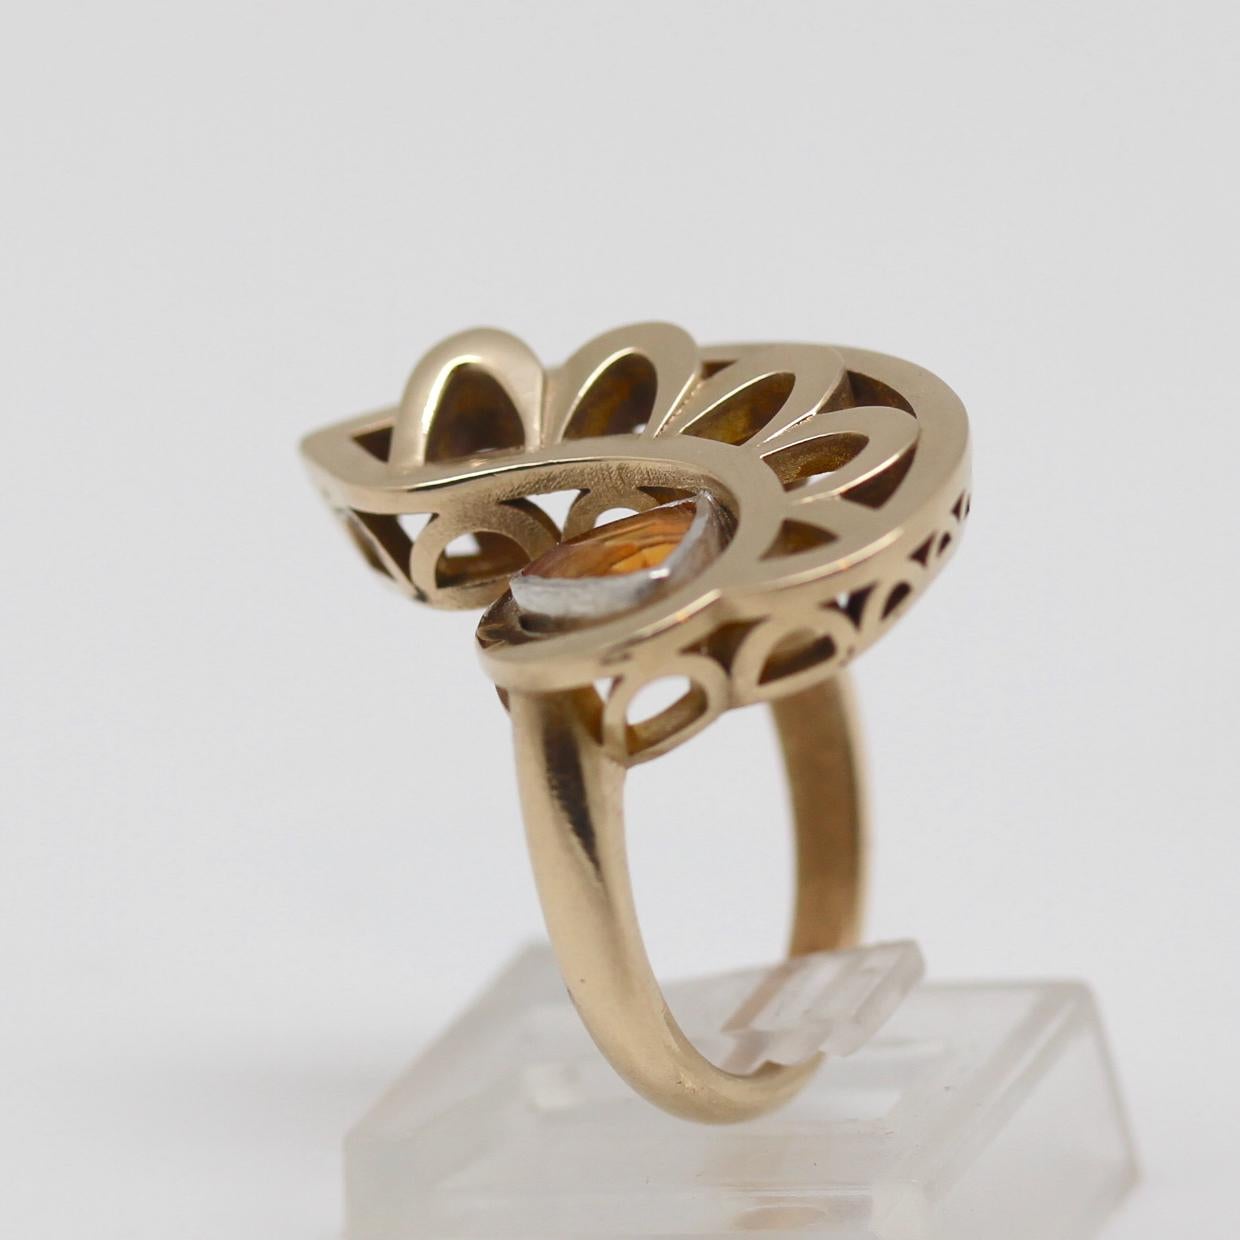 The protective Eye of Horus sits atop your finger in this sculptural ring.  Fascinating to touch and to study, this design spirals like a staircase.  Printed in a brass/bronze alloy that doesn't tarnish or discolor your finger. Sterling bezel-set